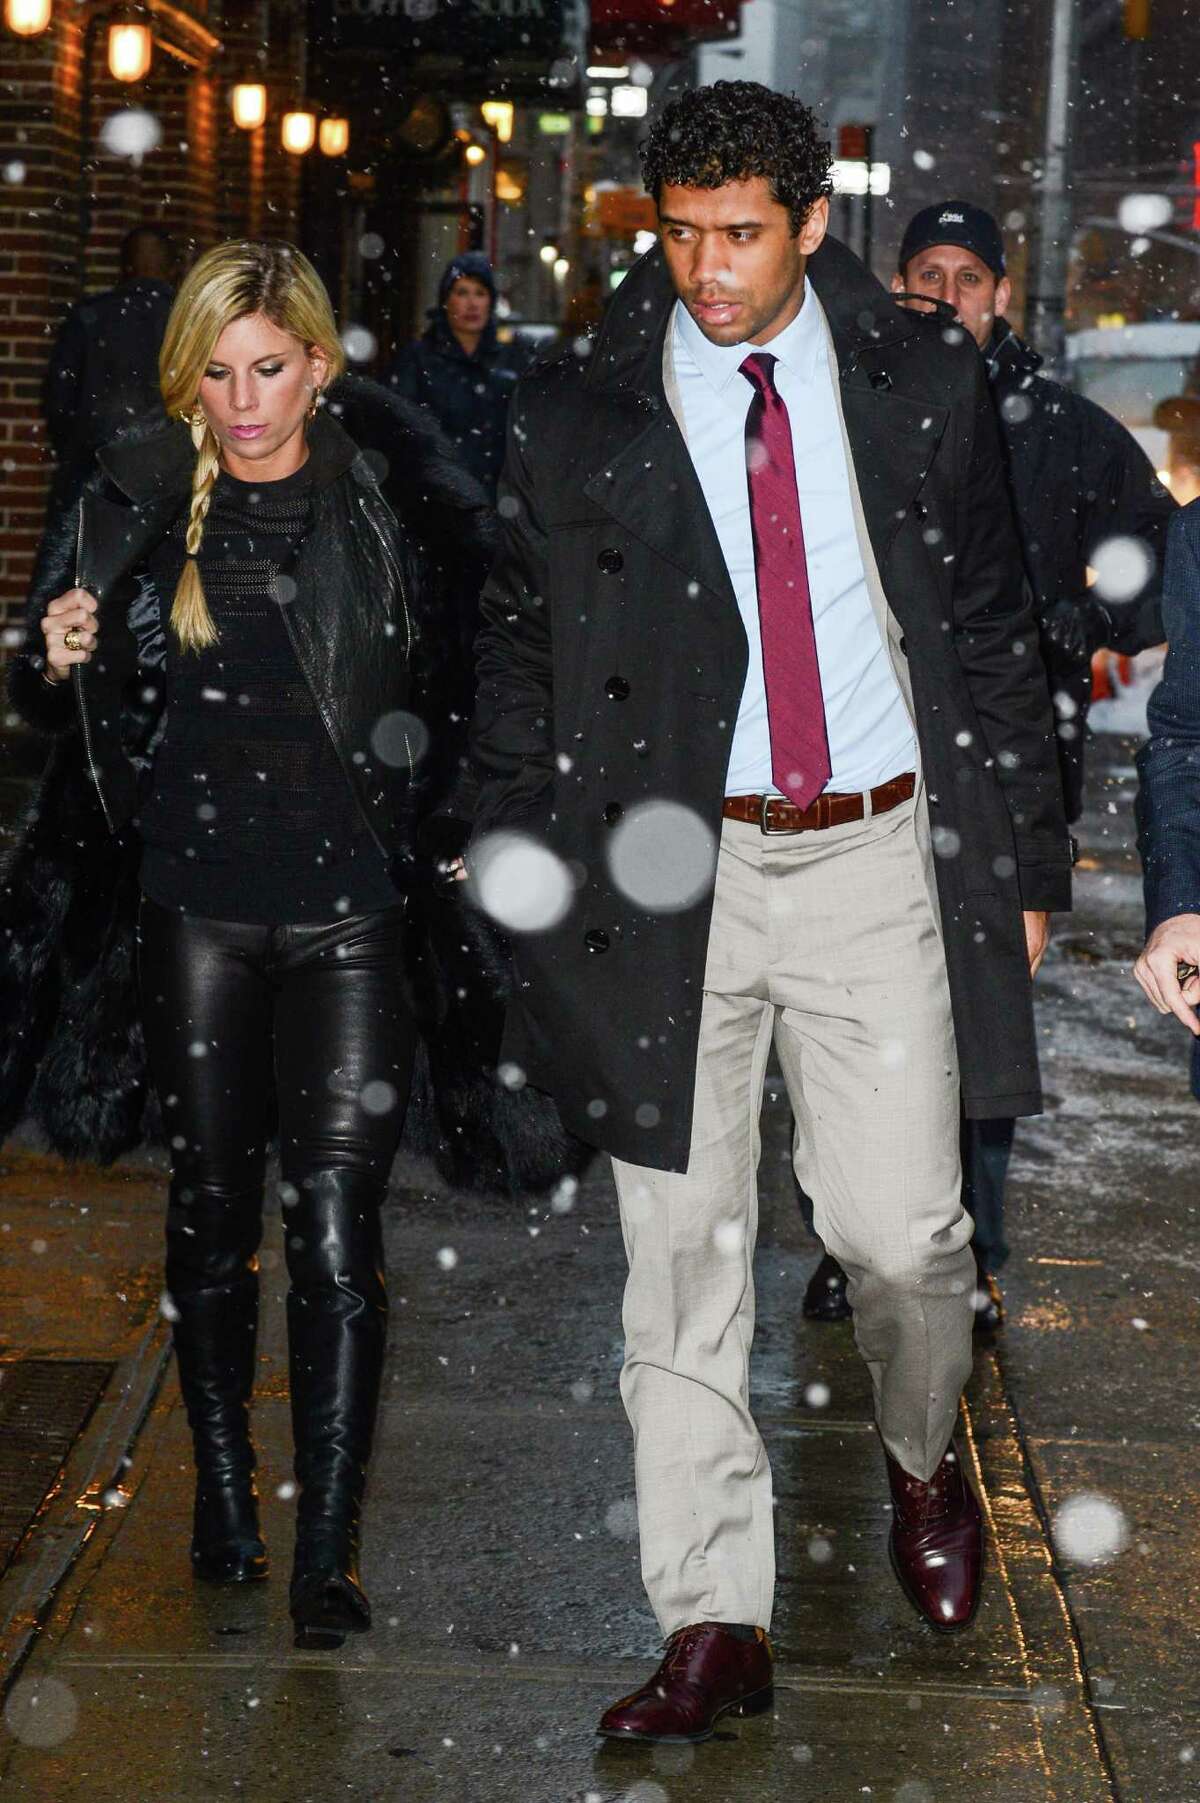 Russell Wilson and his wife, Ashton Meem, enter the "Late Show With David Letterman" taping at the Ed Sullivan Theater on February 3, 2014, in New York City -- the day after his Seahawks won Super Bowl XLVIII.